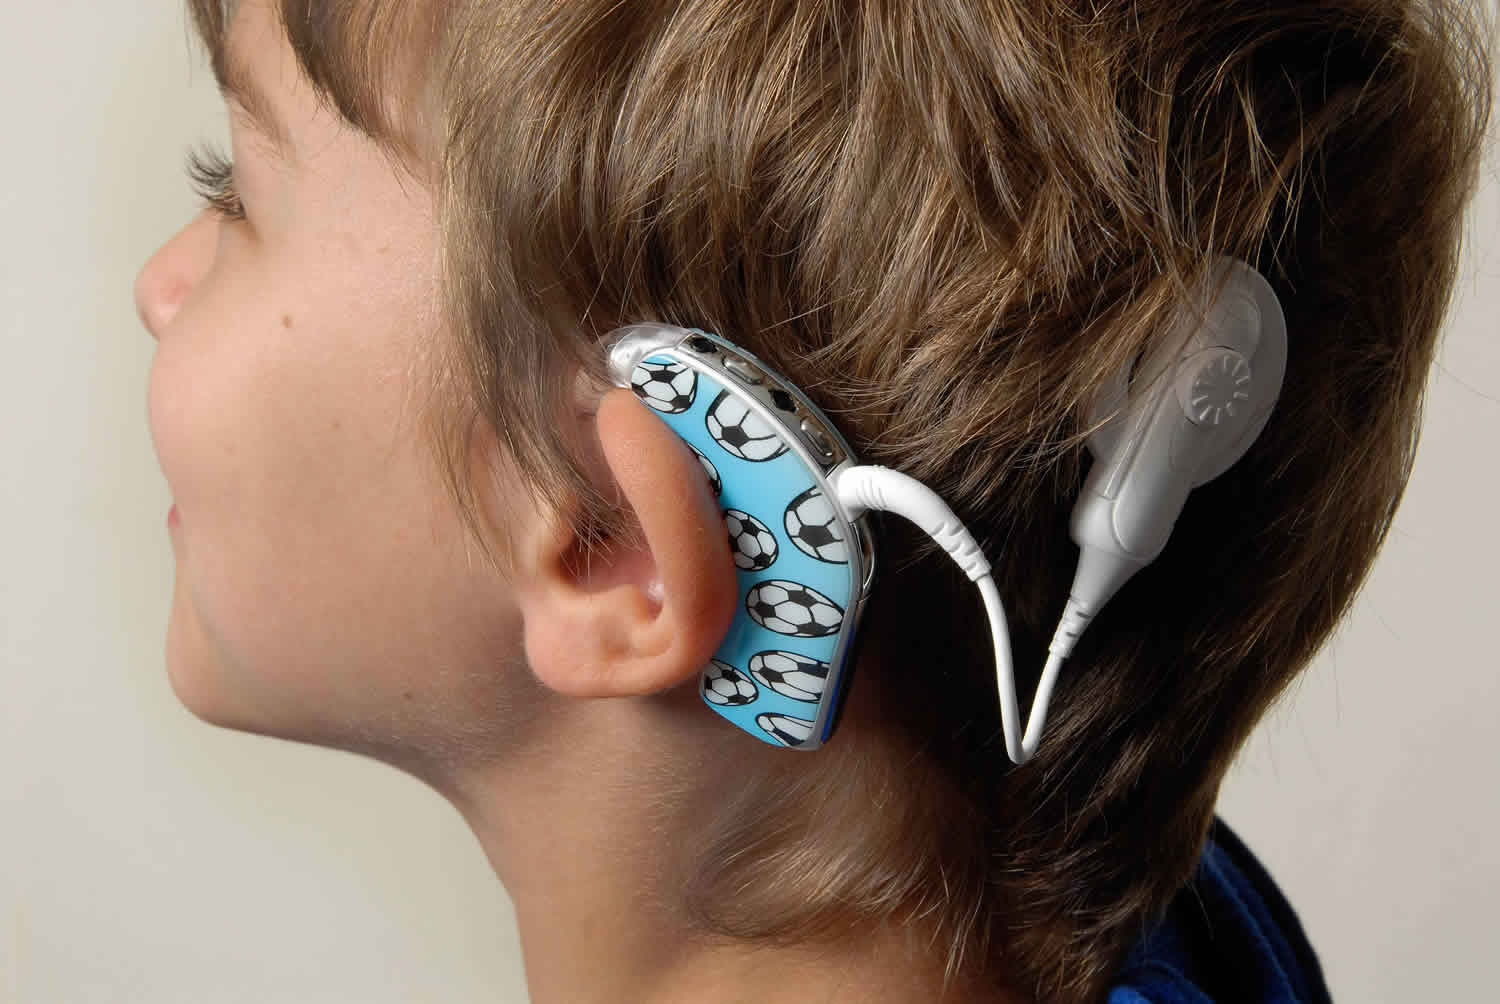 Cochlear Implant Function Surgery And Cochlear Implant Pros And Cons